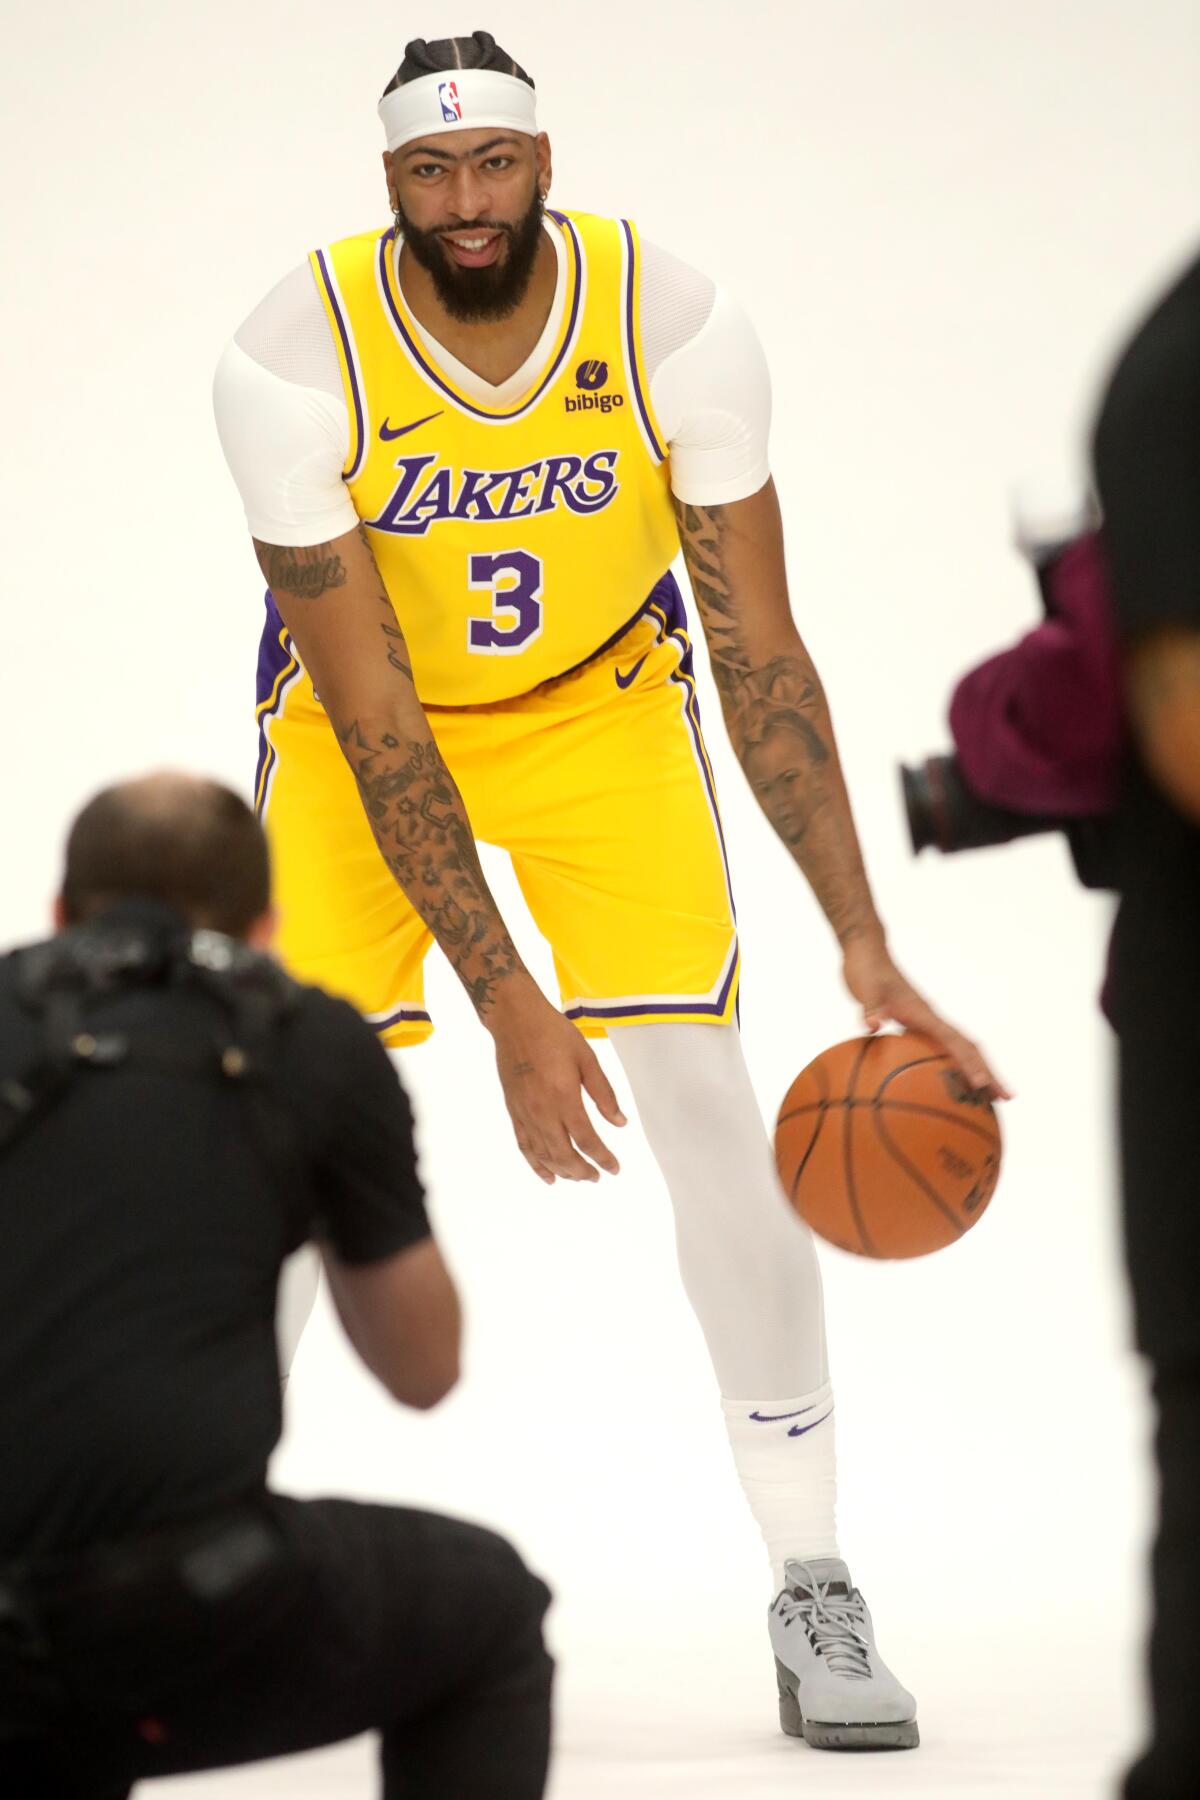 Lakers forward Anthony Davis dribbles a basketball as he poses for a photo on media day.